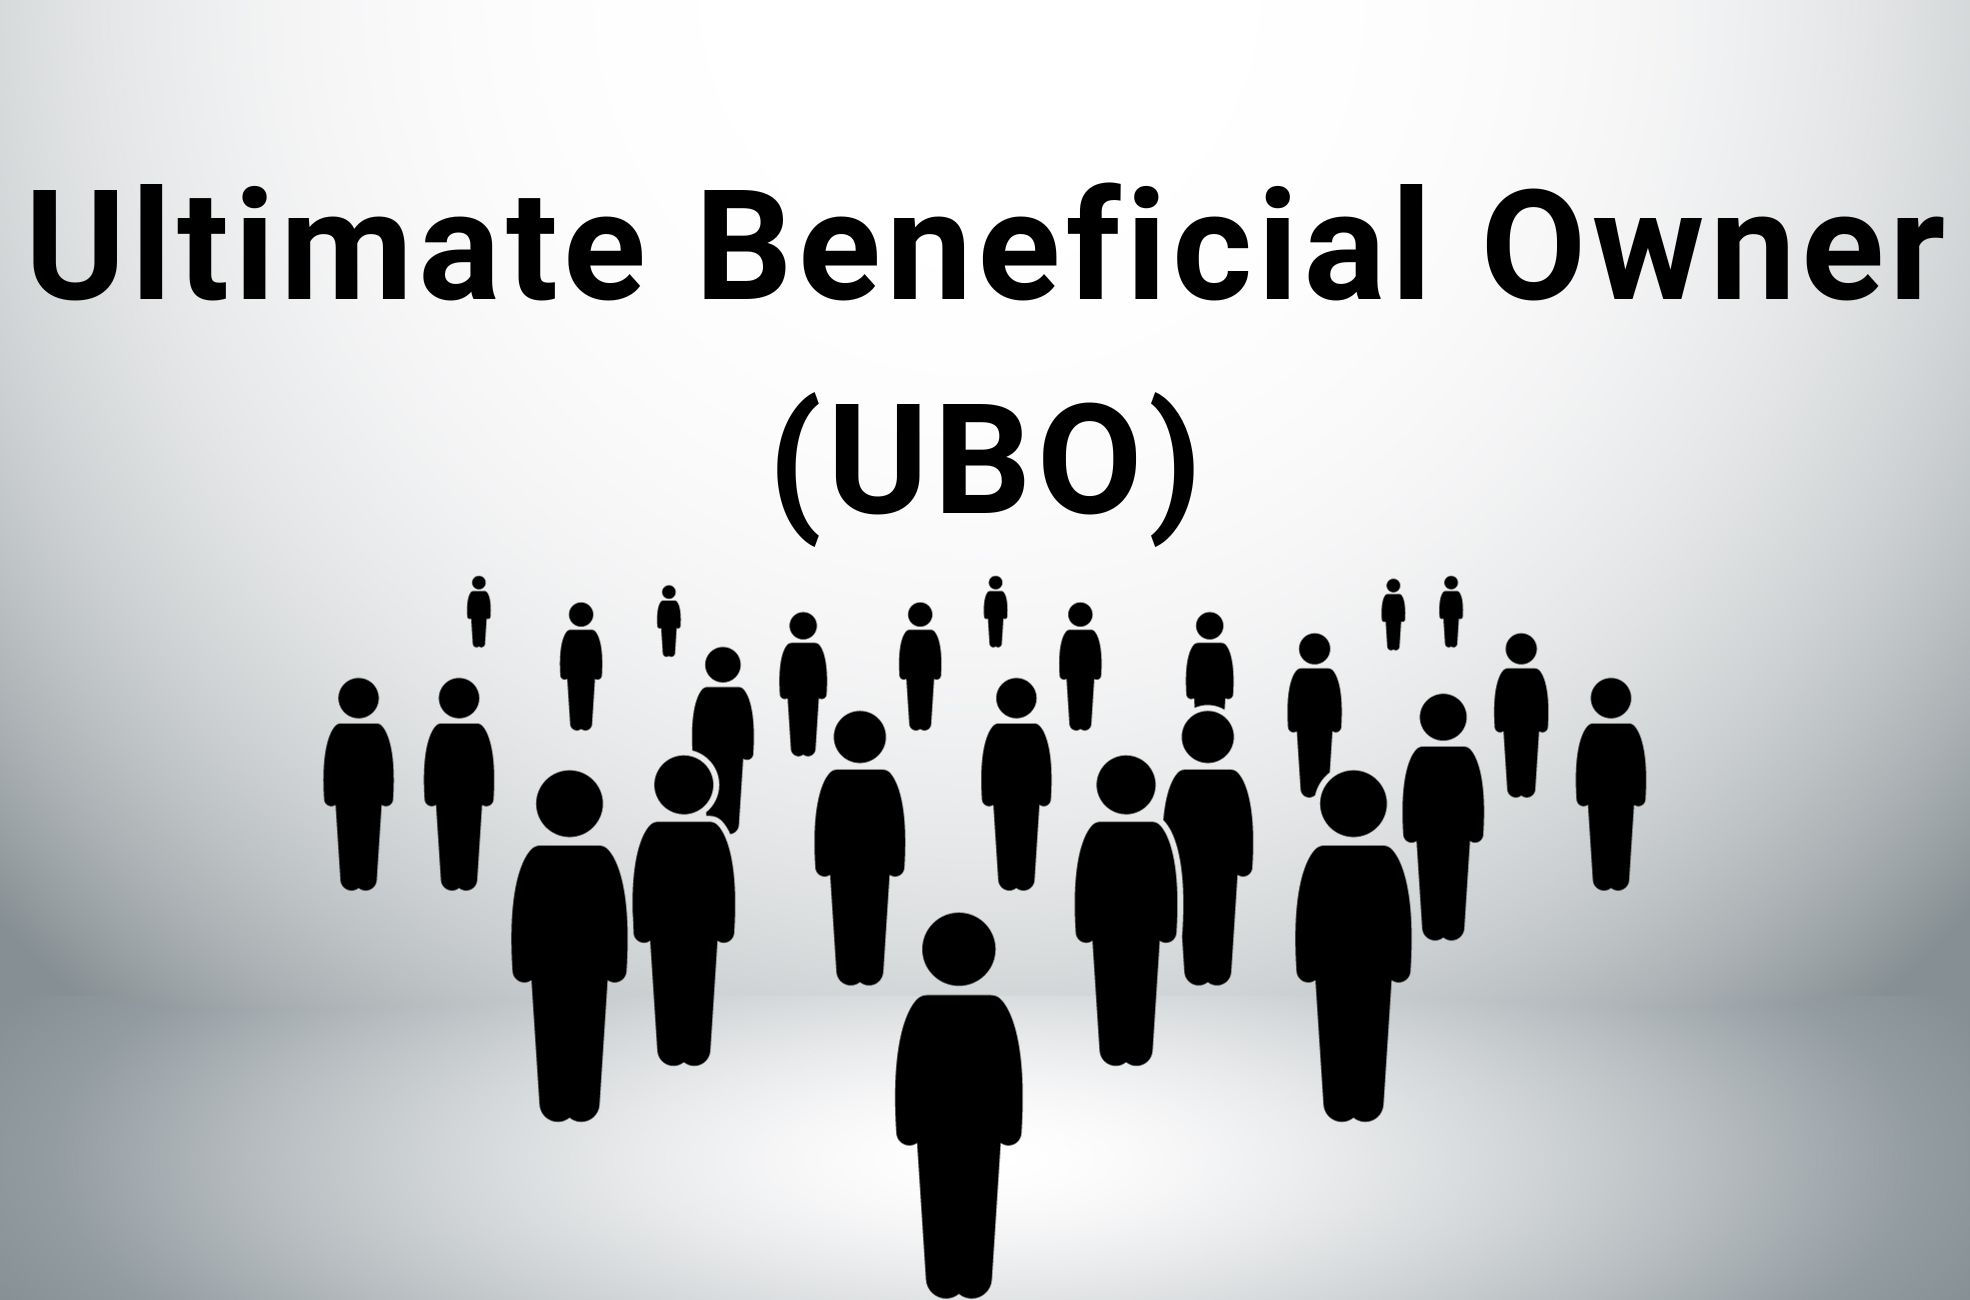 Stick Figure People On Grey Background With Title Of Ultimate Beneficial Owner (UBO)